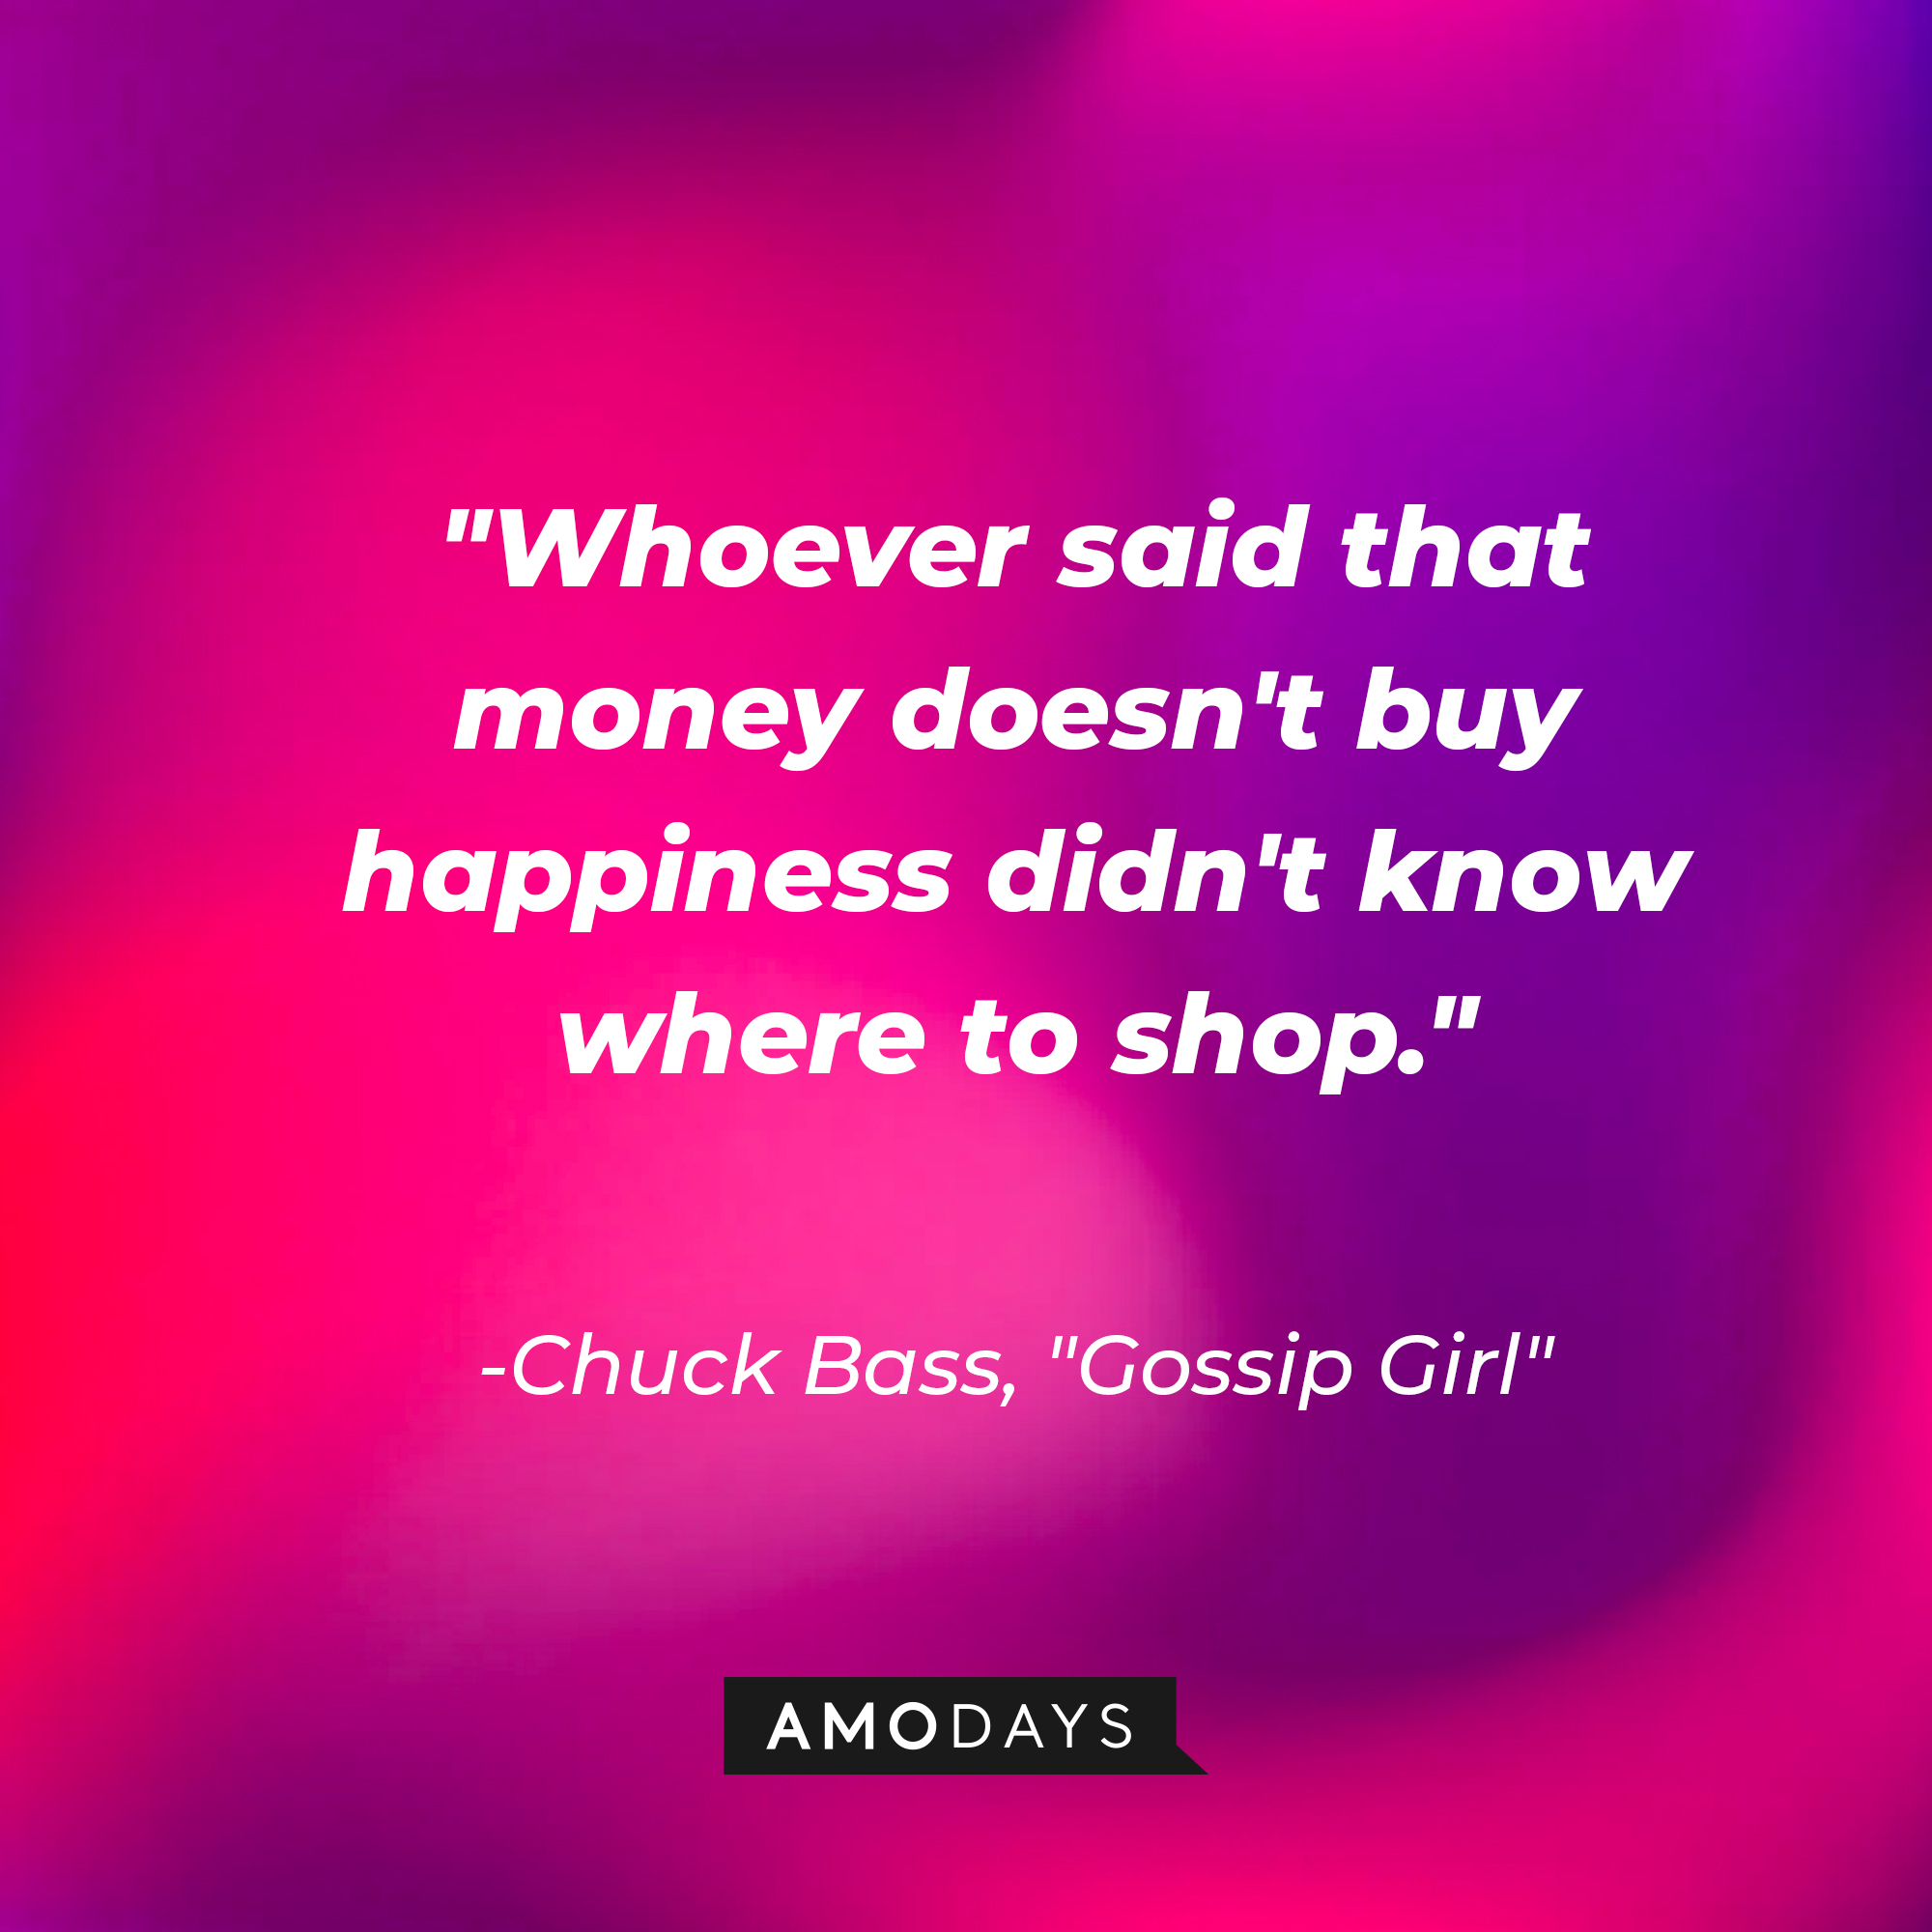 Chuck Bass' quote: "Whoever said that money doesn't buy happiness didn't know where to shop."| Source: AmoDays